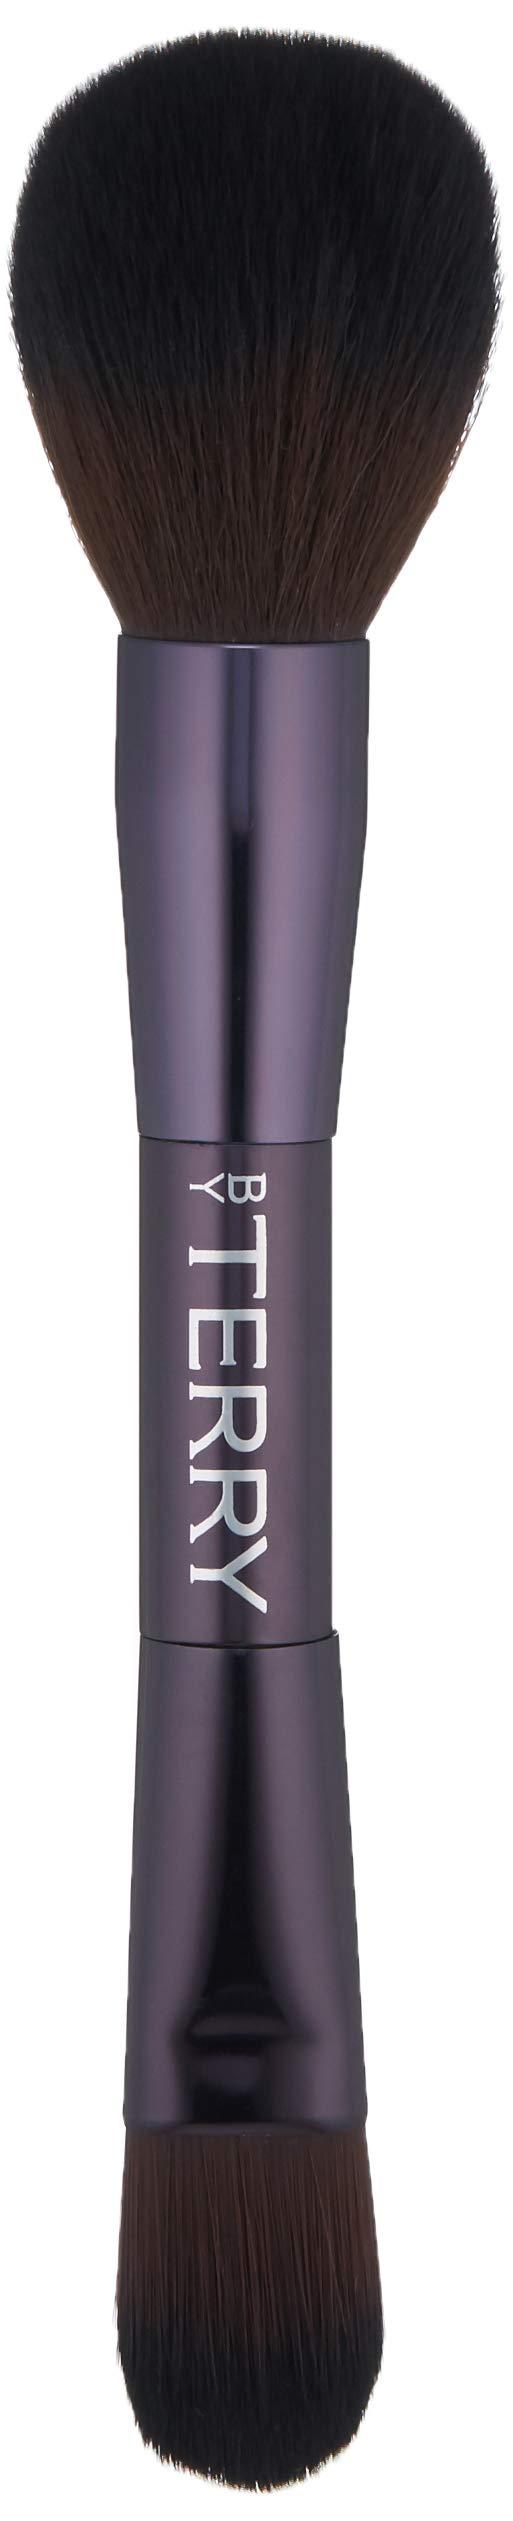 [Australia] - By Terry Dual-Ended Face Brush | Apply Liquid, Cream & Gel | Use with Loose & Compact Powders 